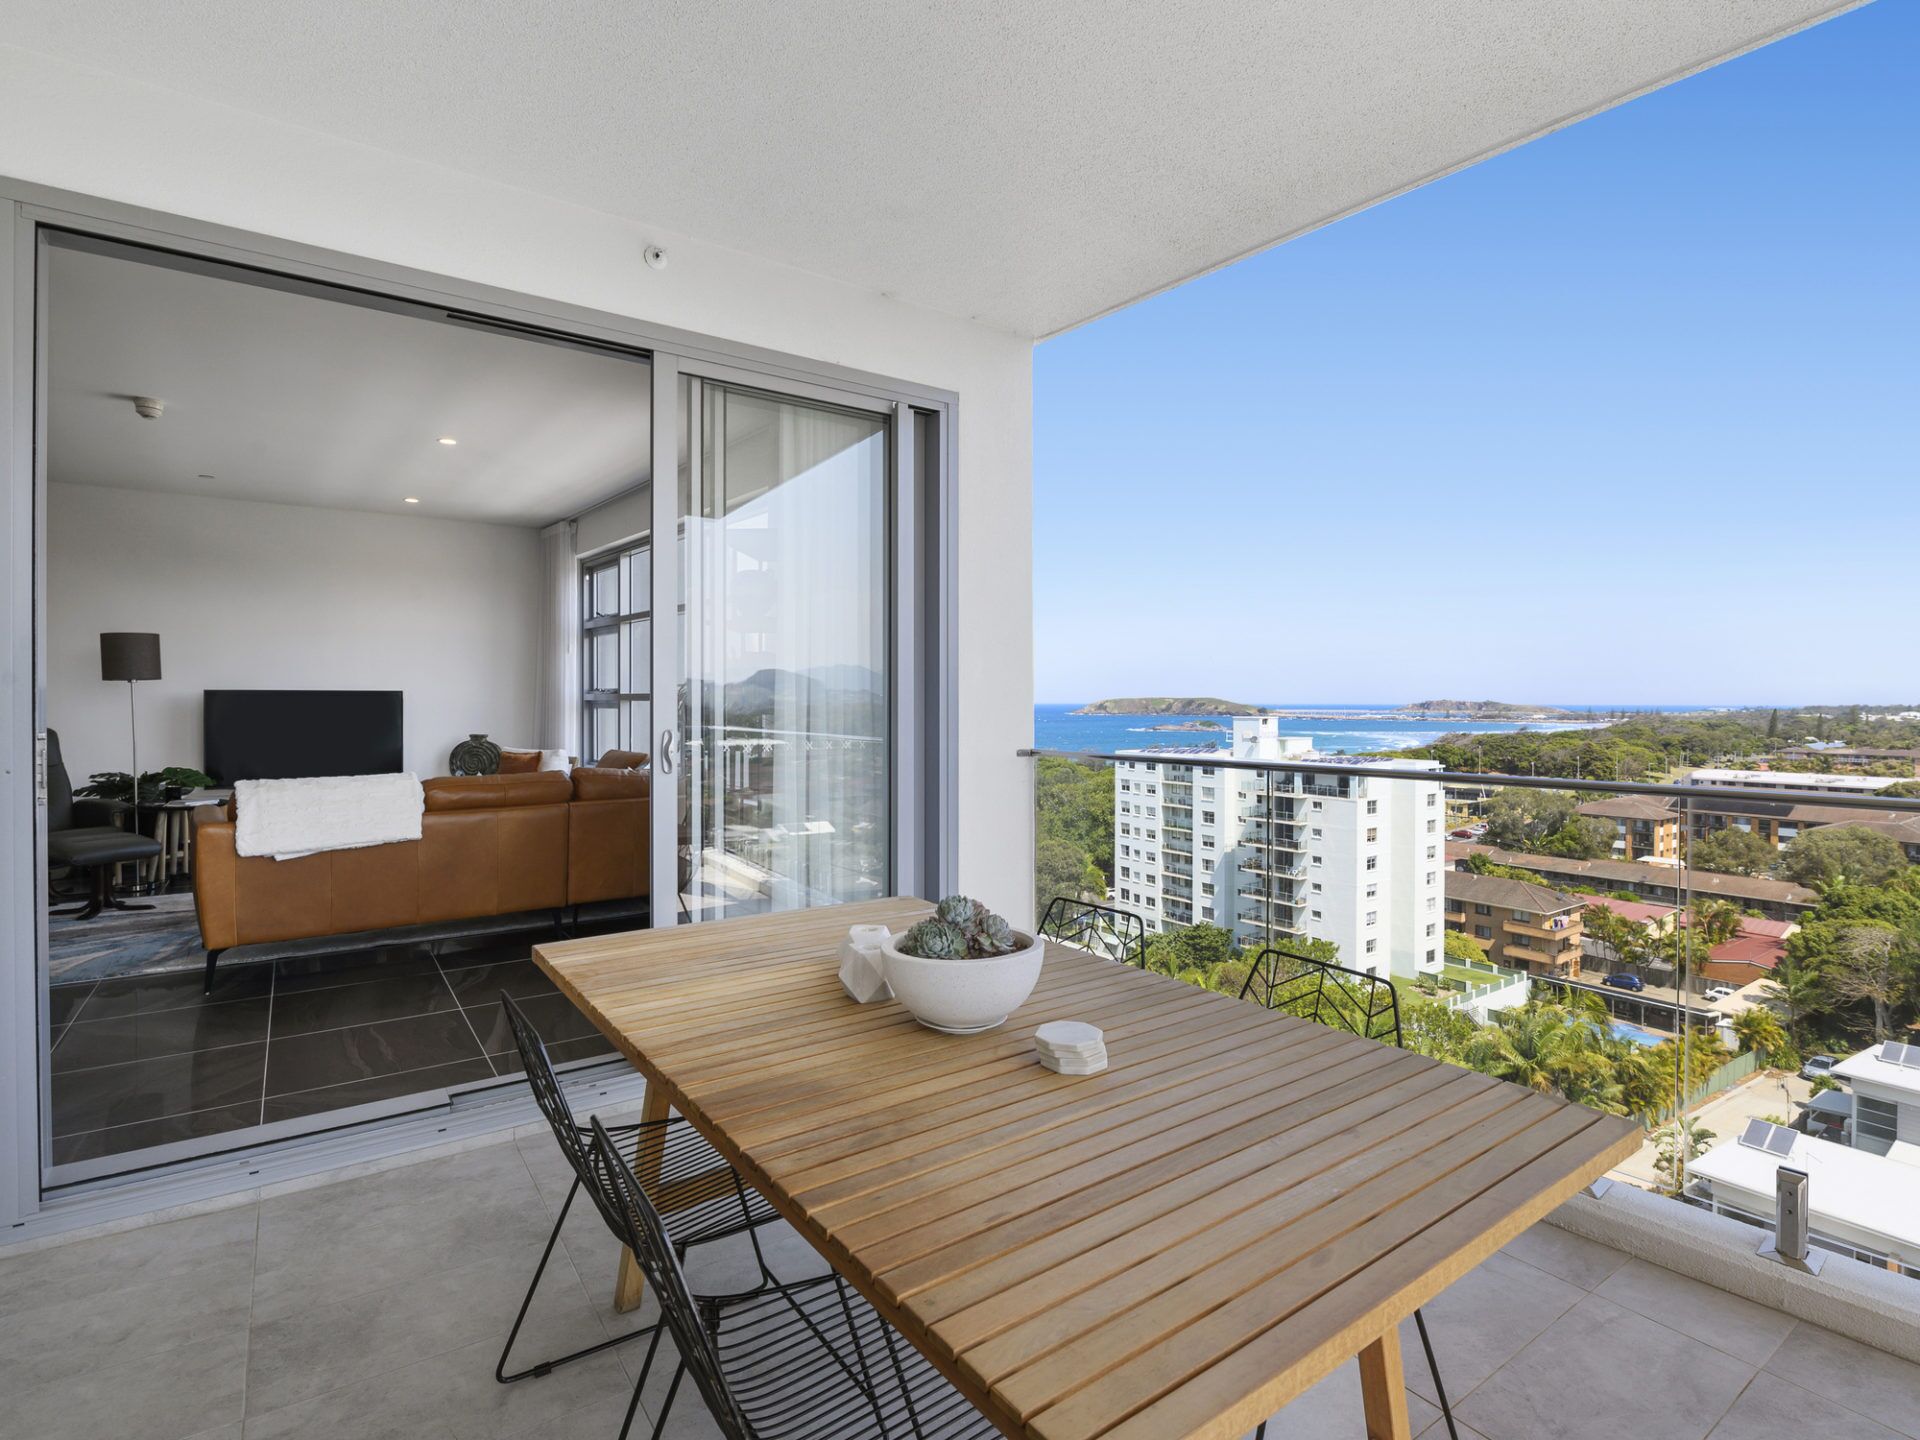 Sub Penthouse With Ocean, Island and Harbour Views of Coffs Harbour